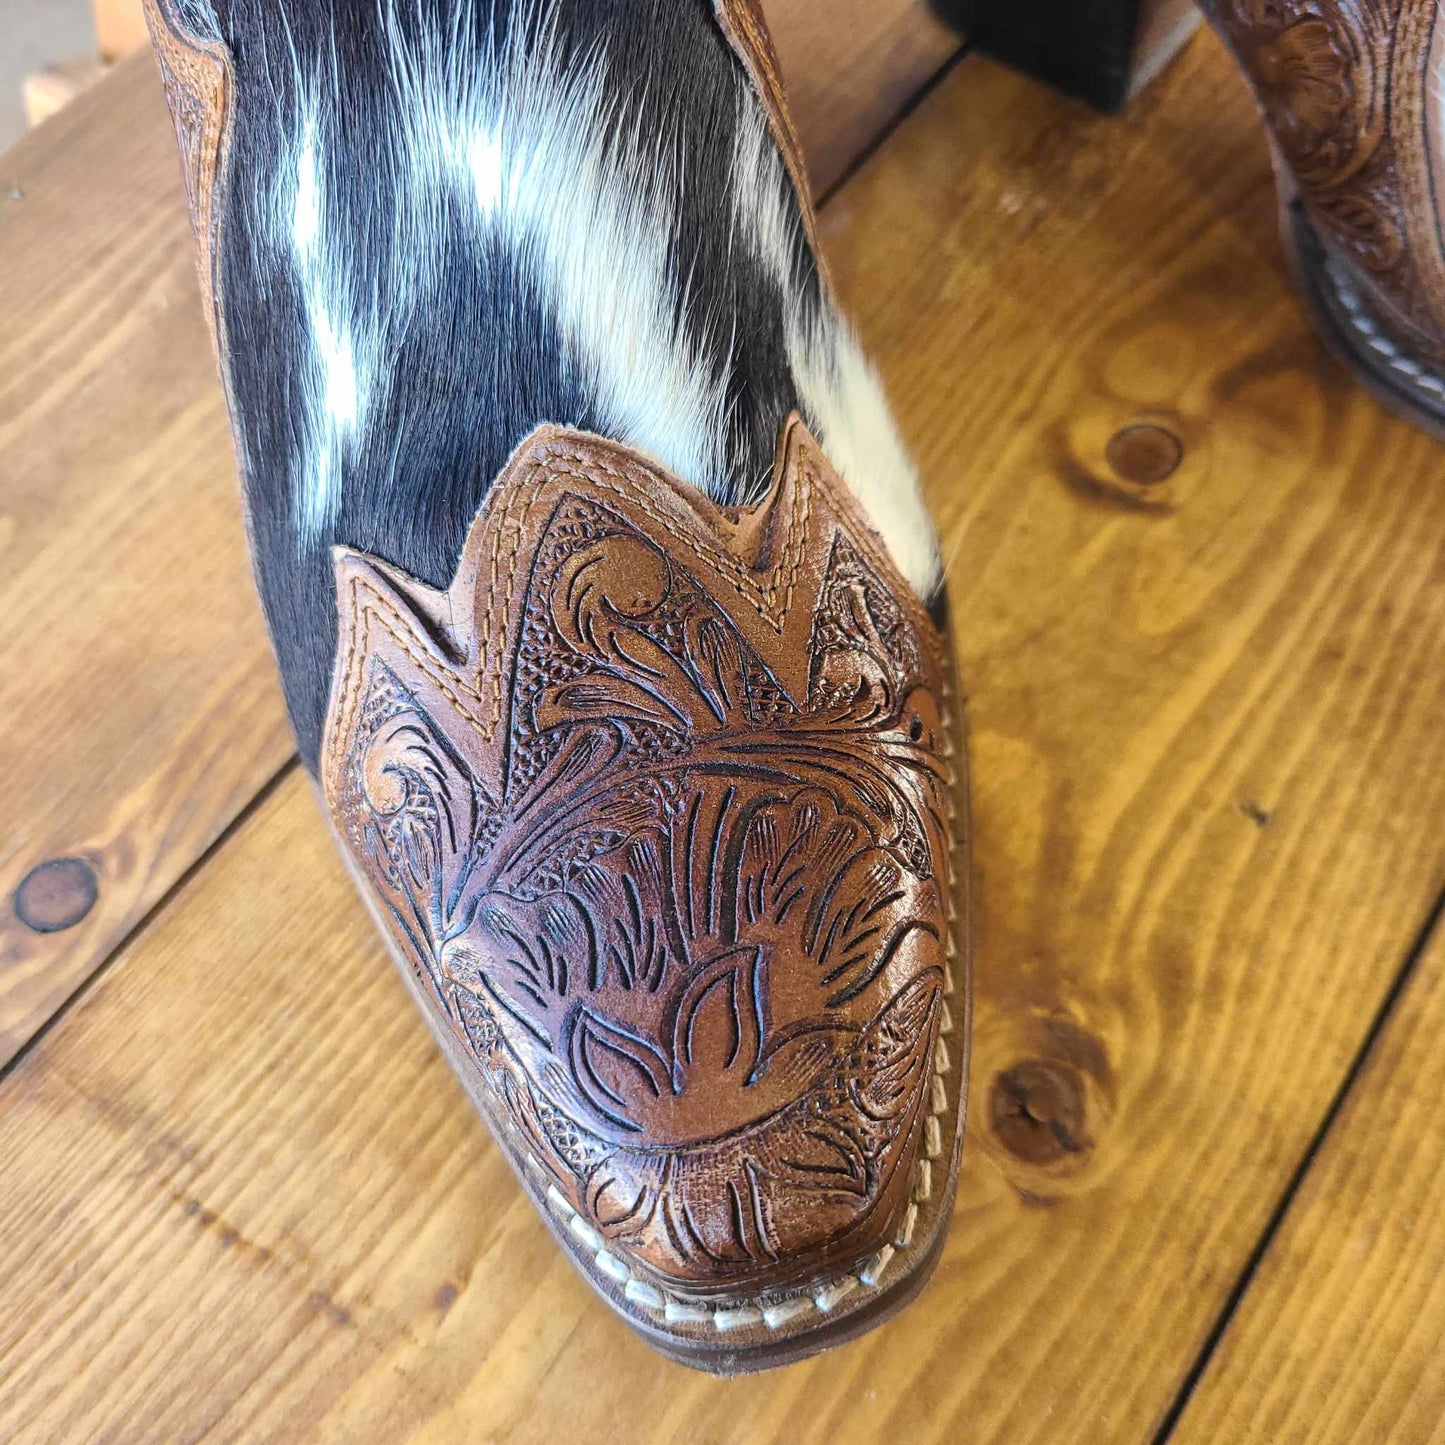 Sandy Mae Hair-on Hide & tooled Leather Boots